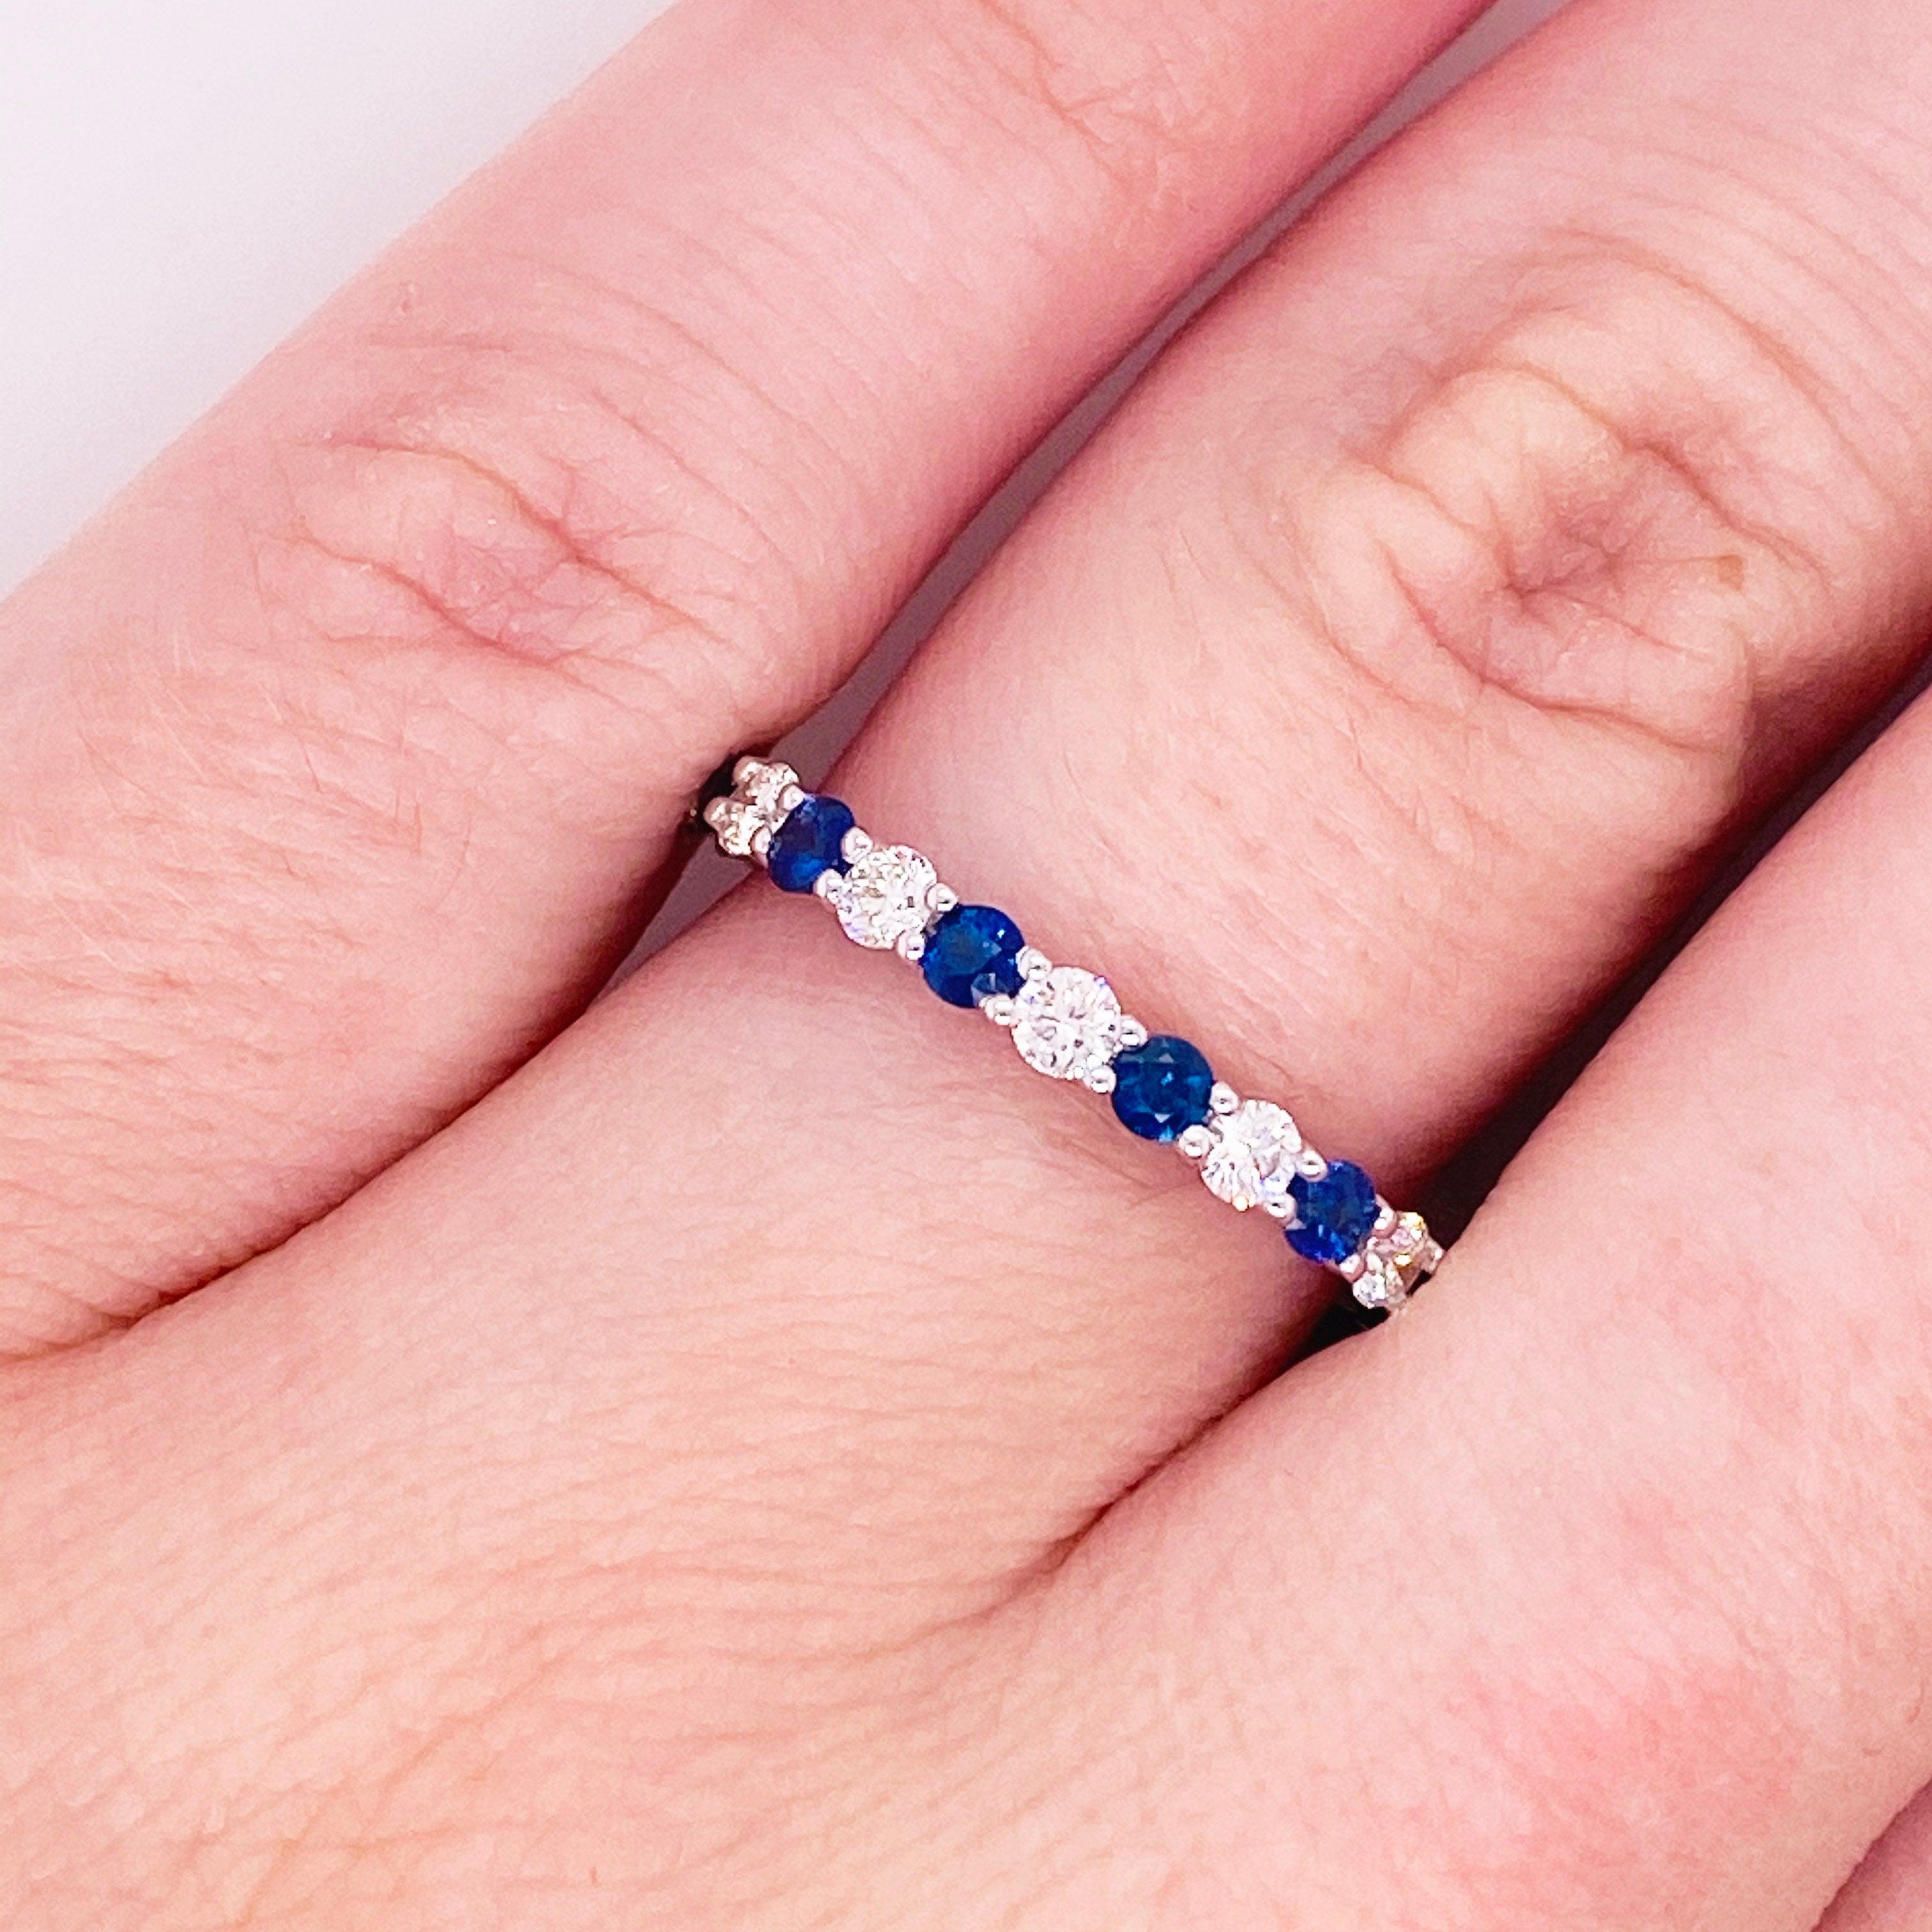 For Sale:  Sapphire Diamond Ring, Blue Sapphire, 18 Karat White Gold, Stackable Band 2